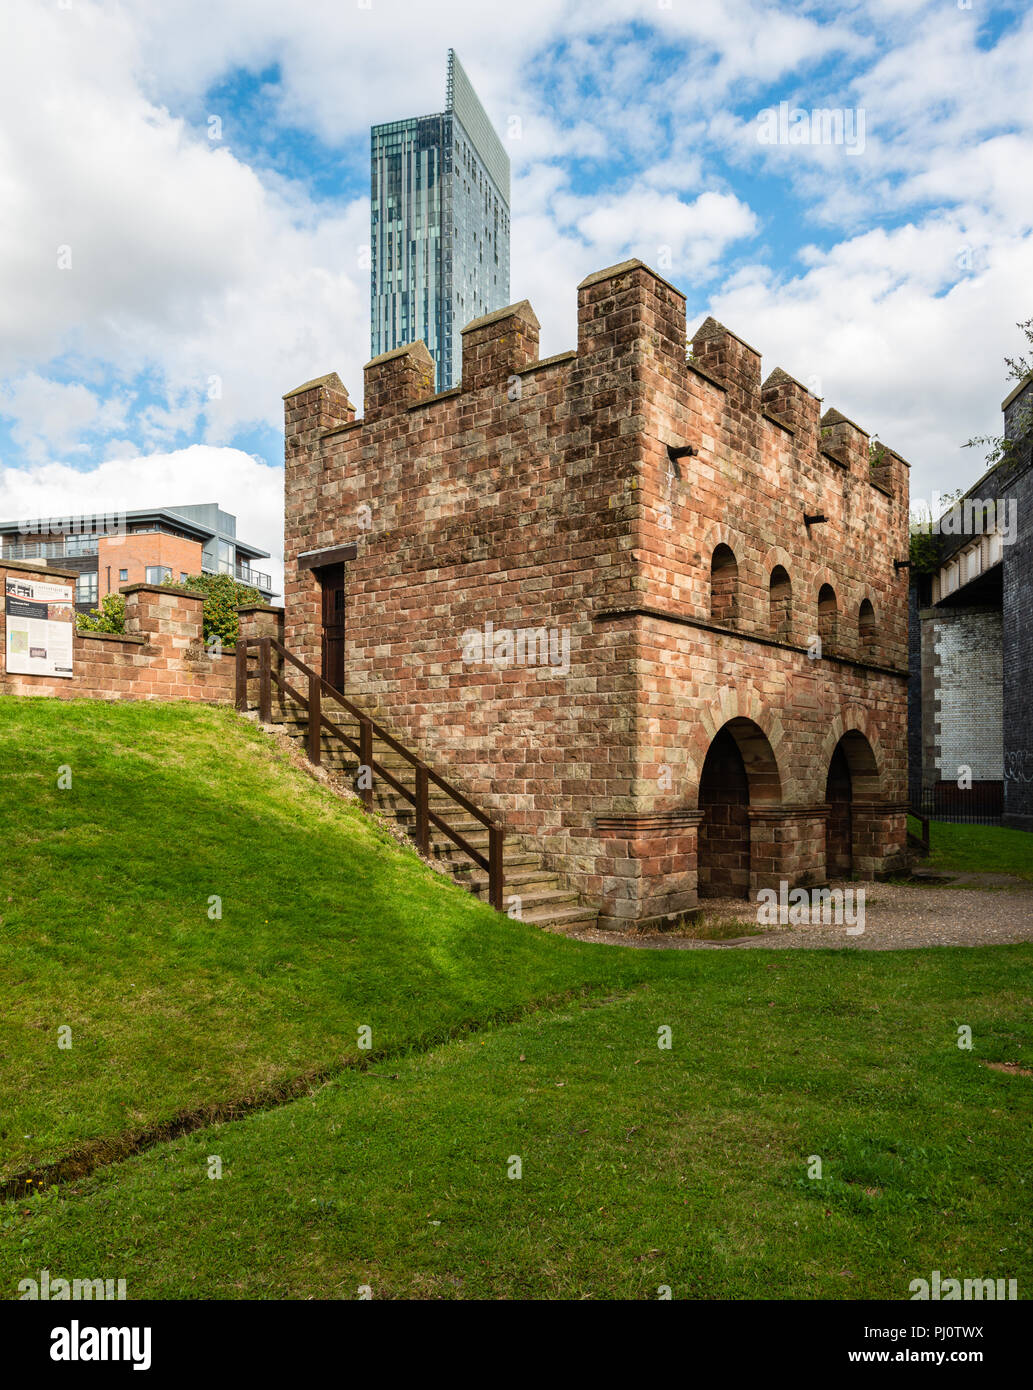 Roman Fort in Castlefield, Manchester, with the Hilton Hotel (Beetham Tower) in the background, showing contrast between old and new Stock Photo